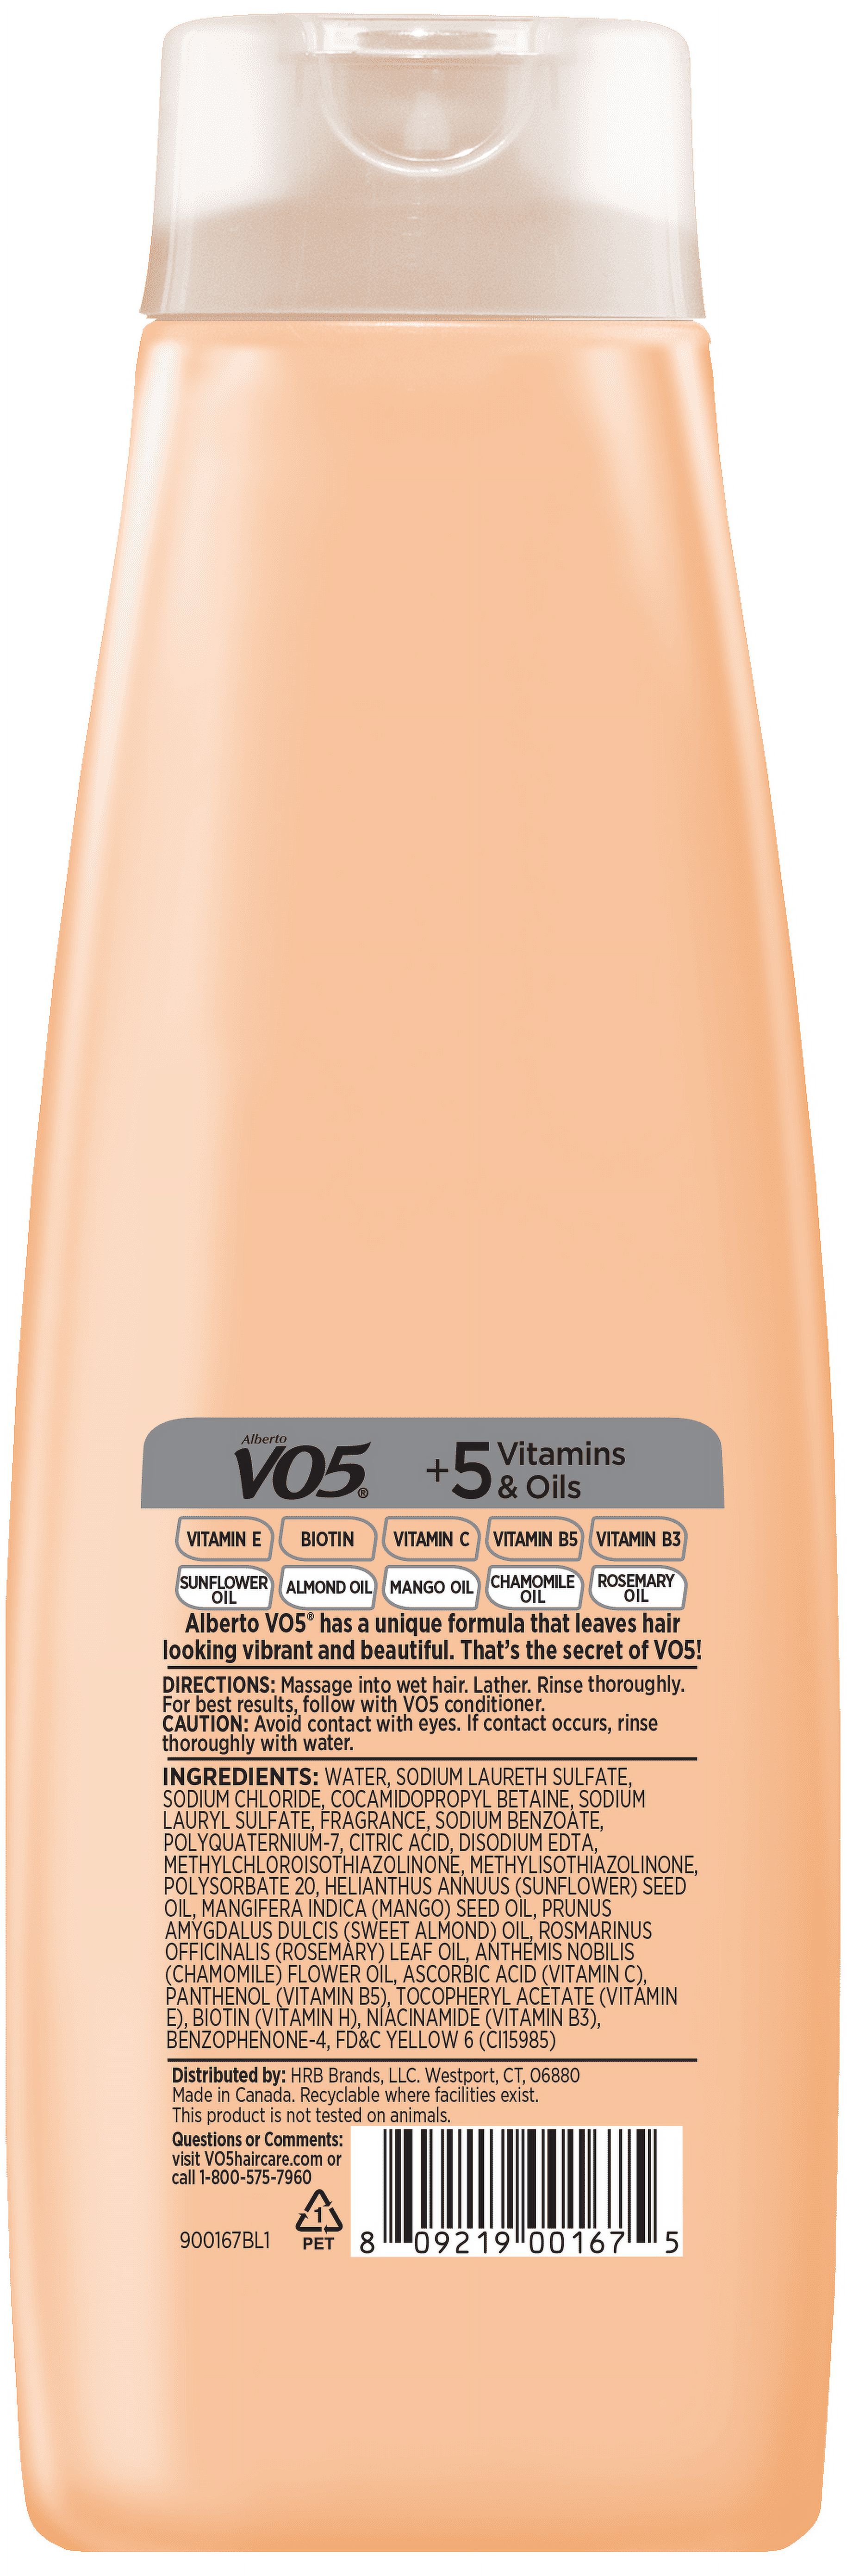 Alberto VO5 Daily Revitalizing Shampoo with Biotin, for All Hair Types,16.9 fl oz - image 2 of 6